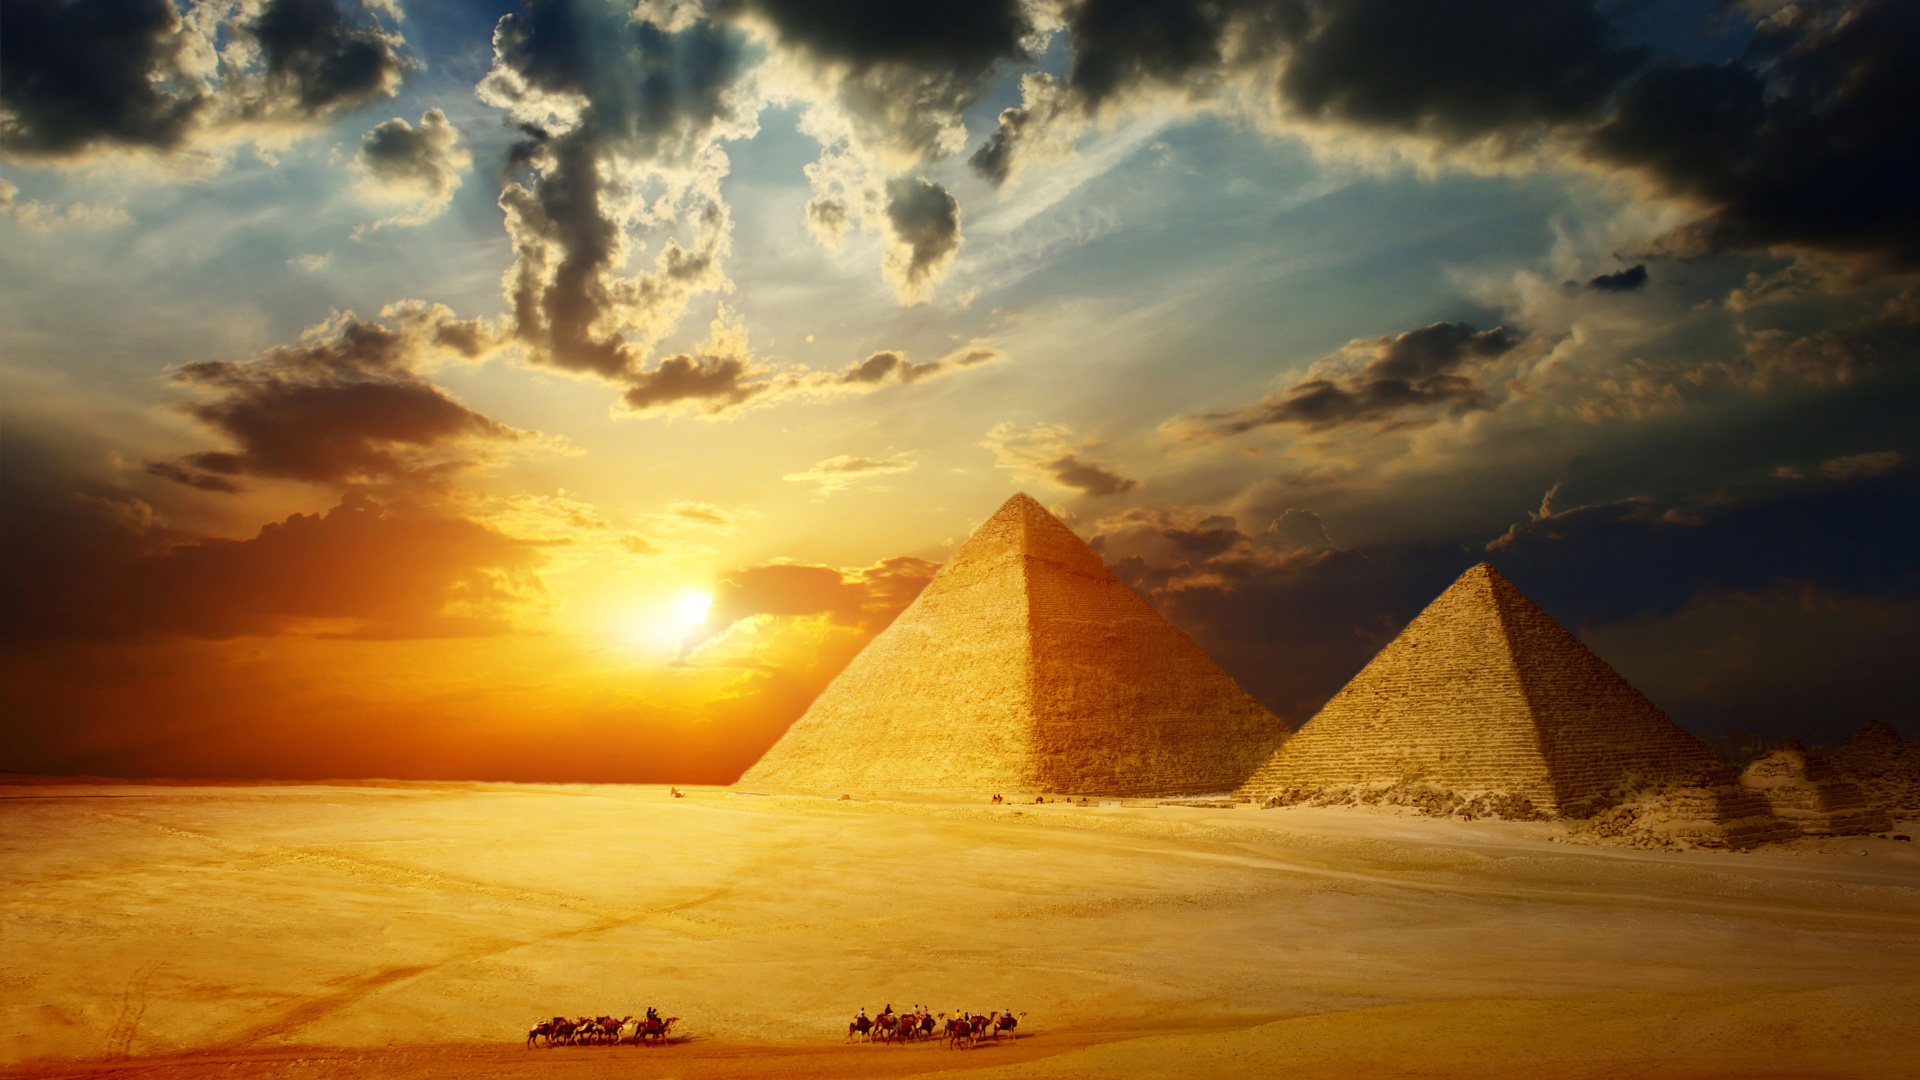 Brown Pyramid on White Sand During Sunset. Wallpaper in 1920x1080 Resolution